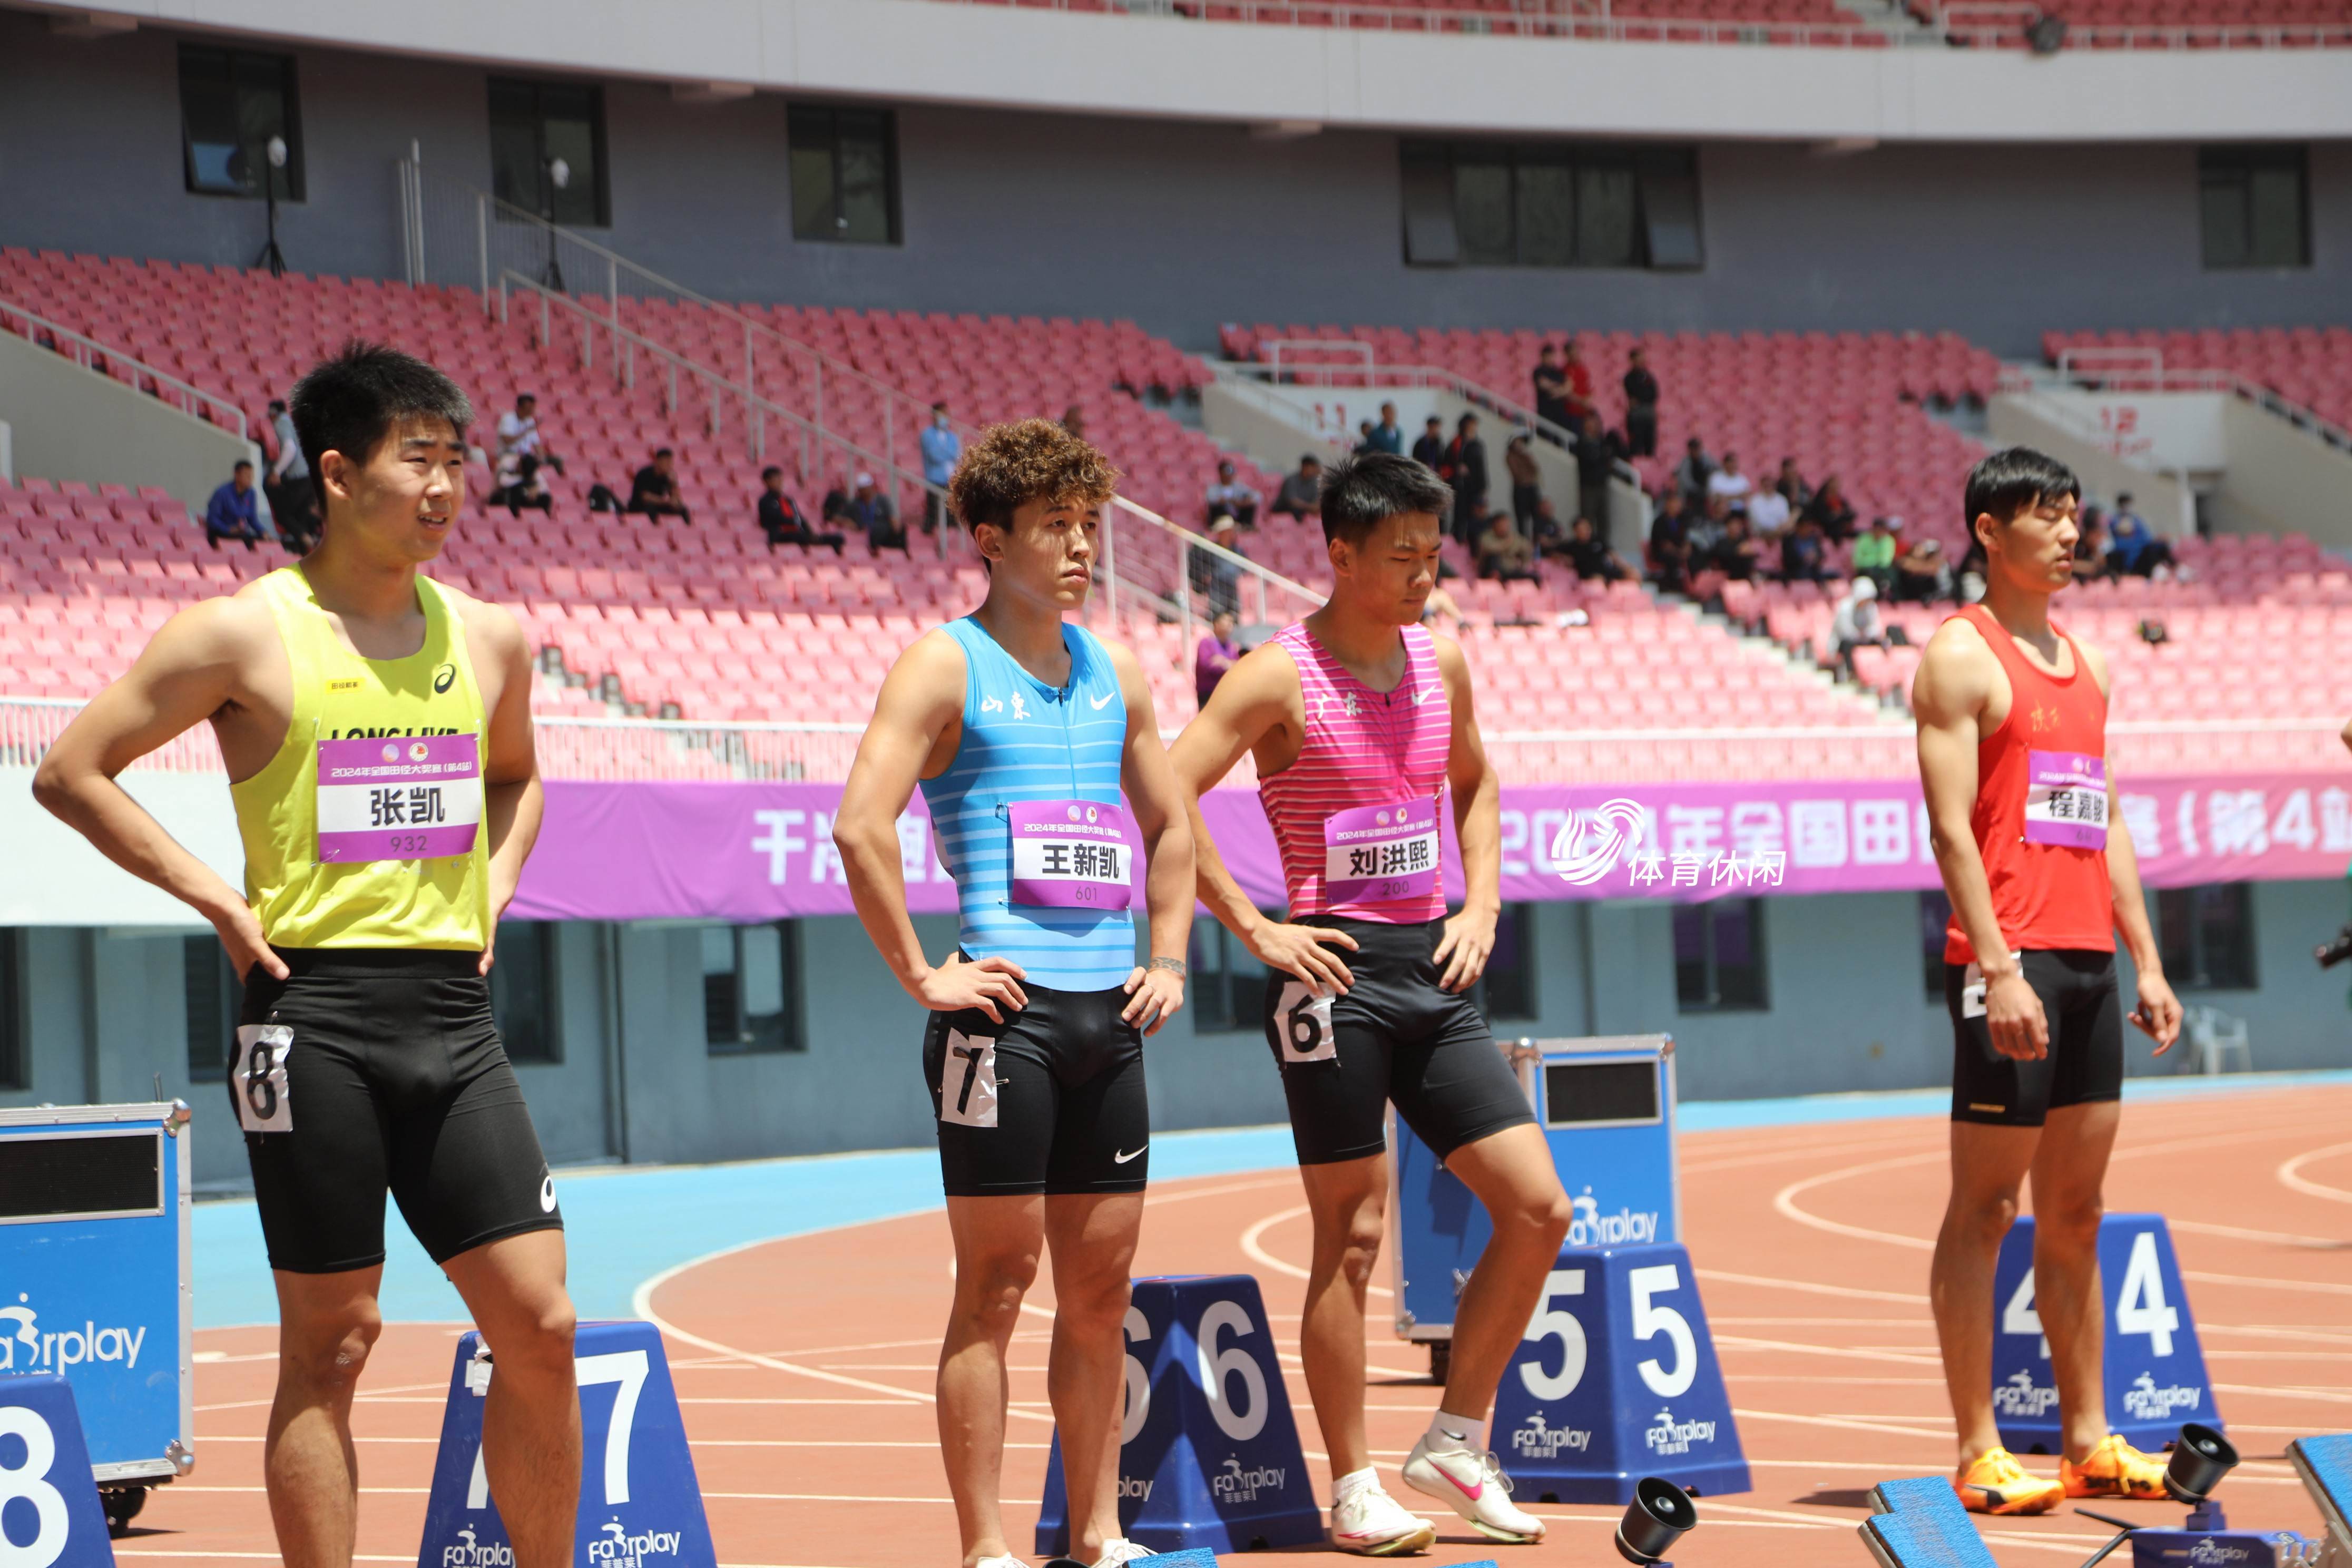  The fourth stop of the National Track and Field Grand Prix starts in Qingdao, with the appearance of all the new stars